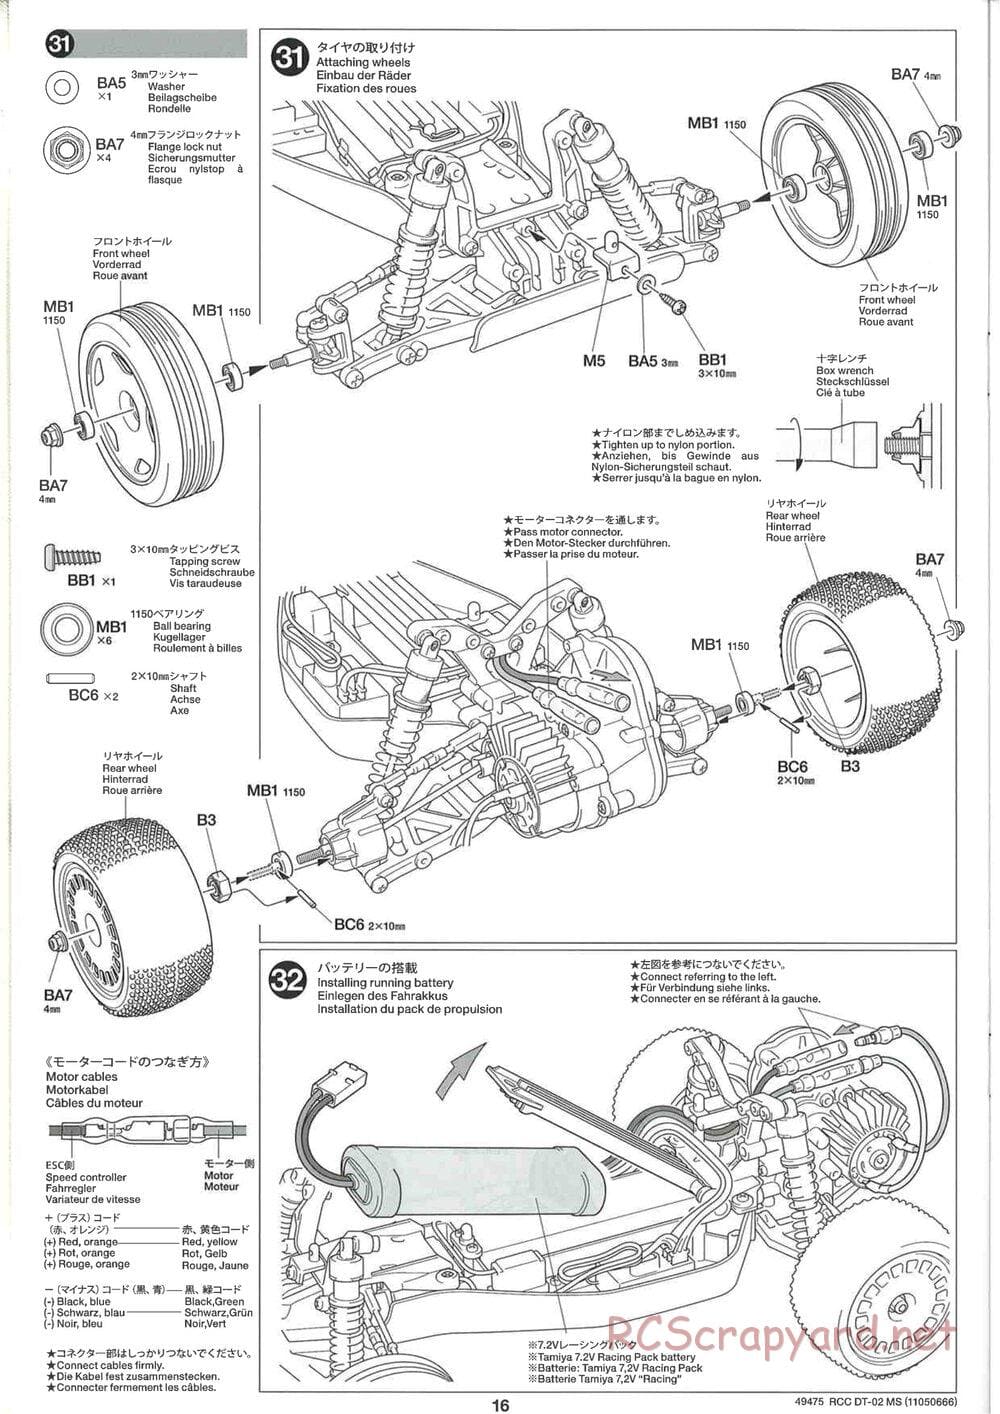 Tamiya - DT-02 MS Chassis - Manual - Page 17